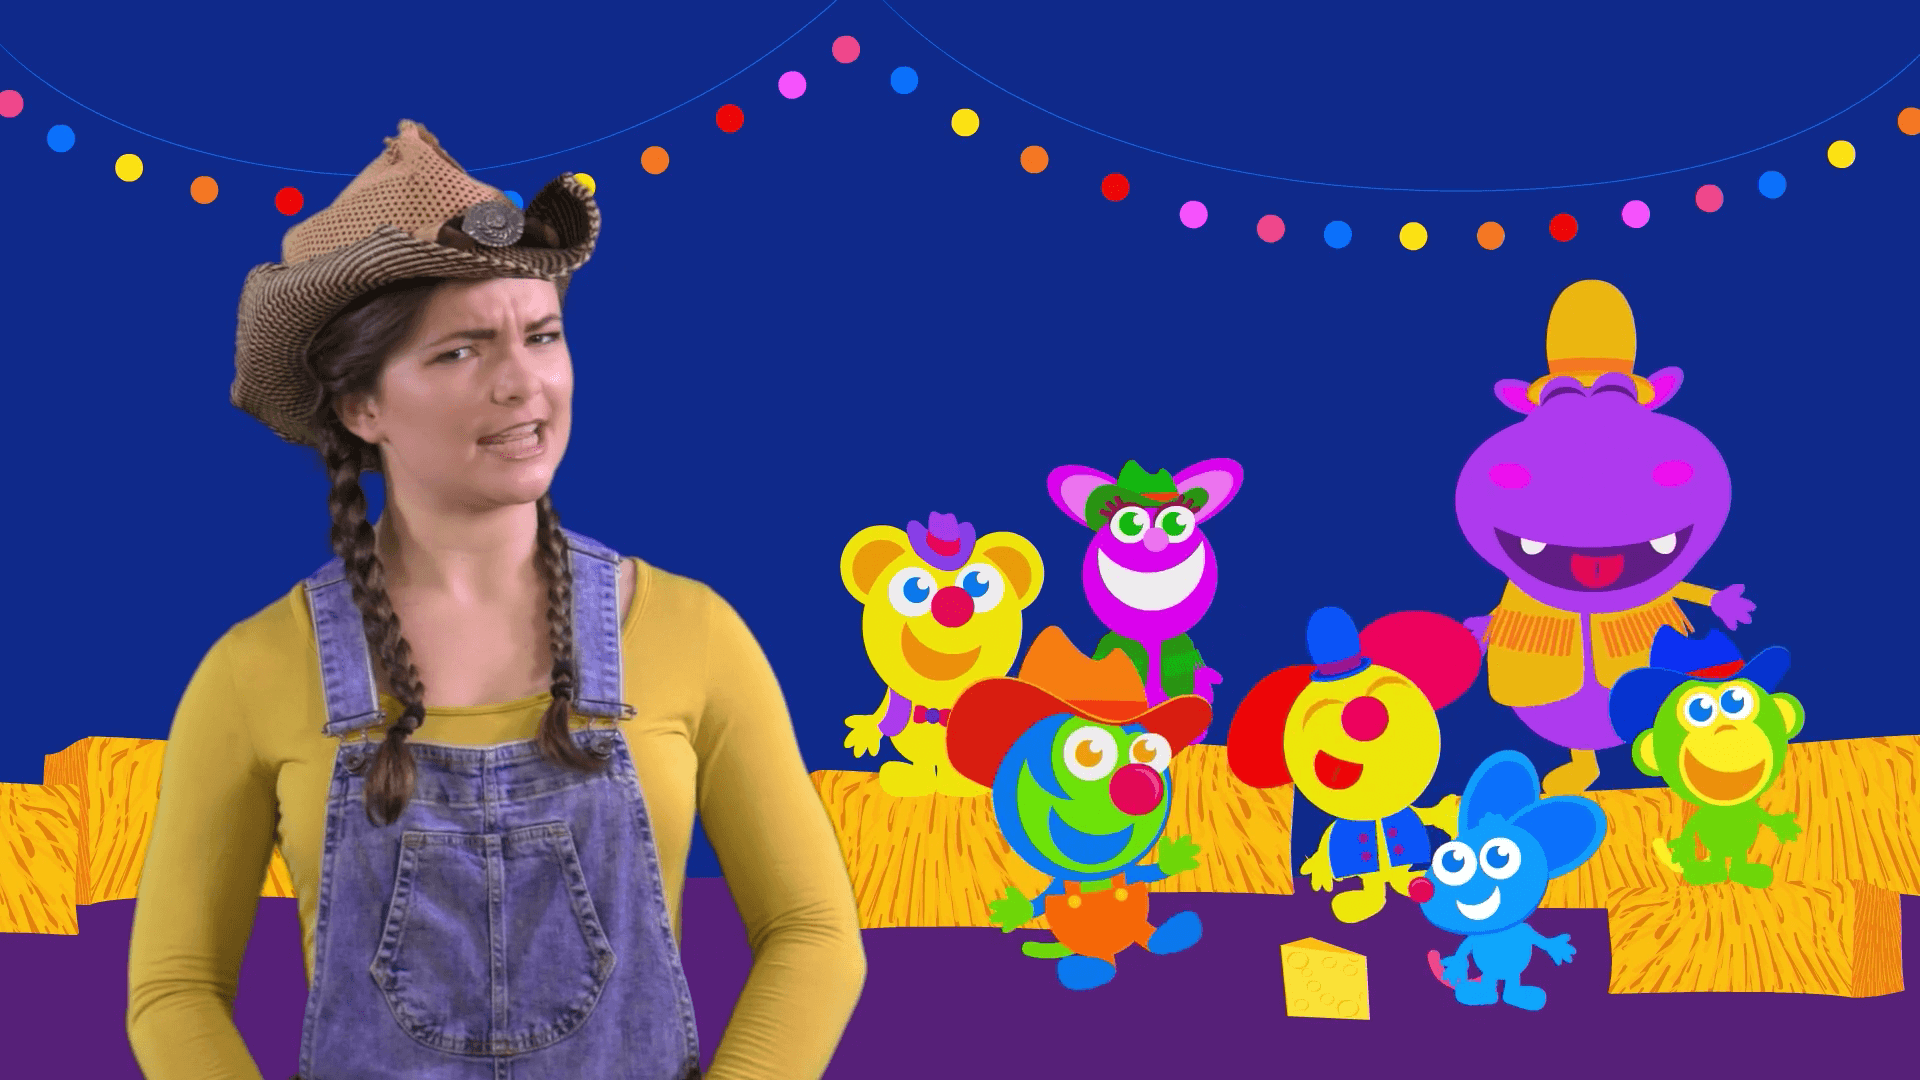 kiki sings the farmer in the dell title for Kiki's Music Time music video for toddlers on KneeBouncers